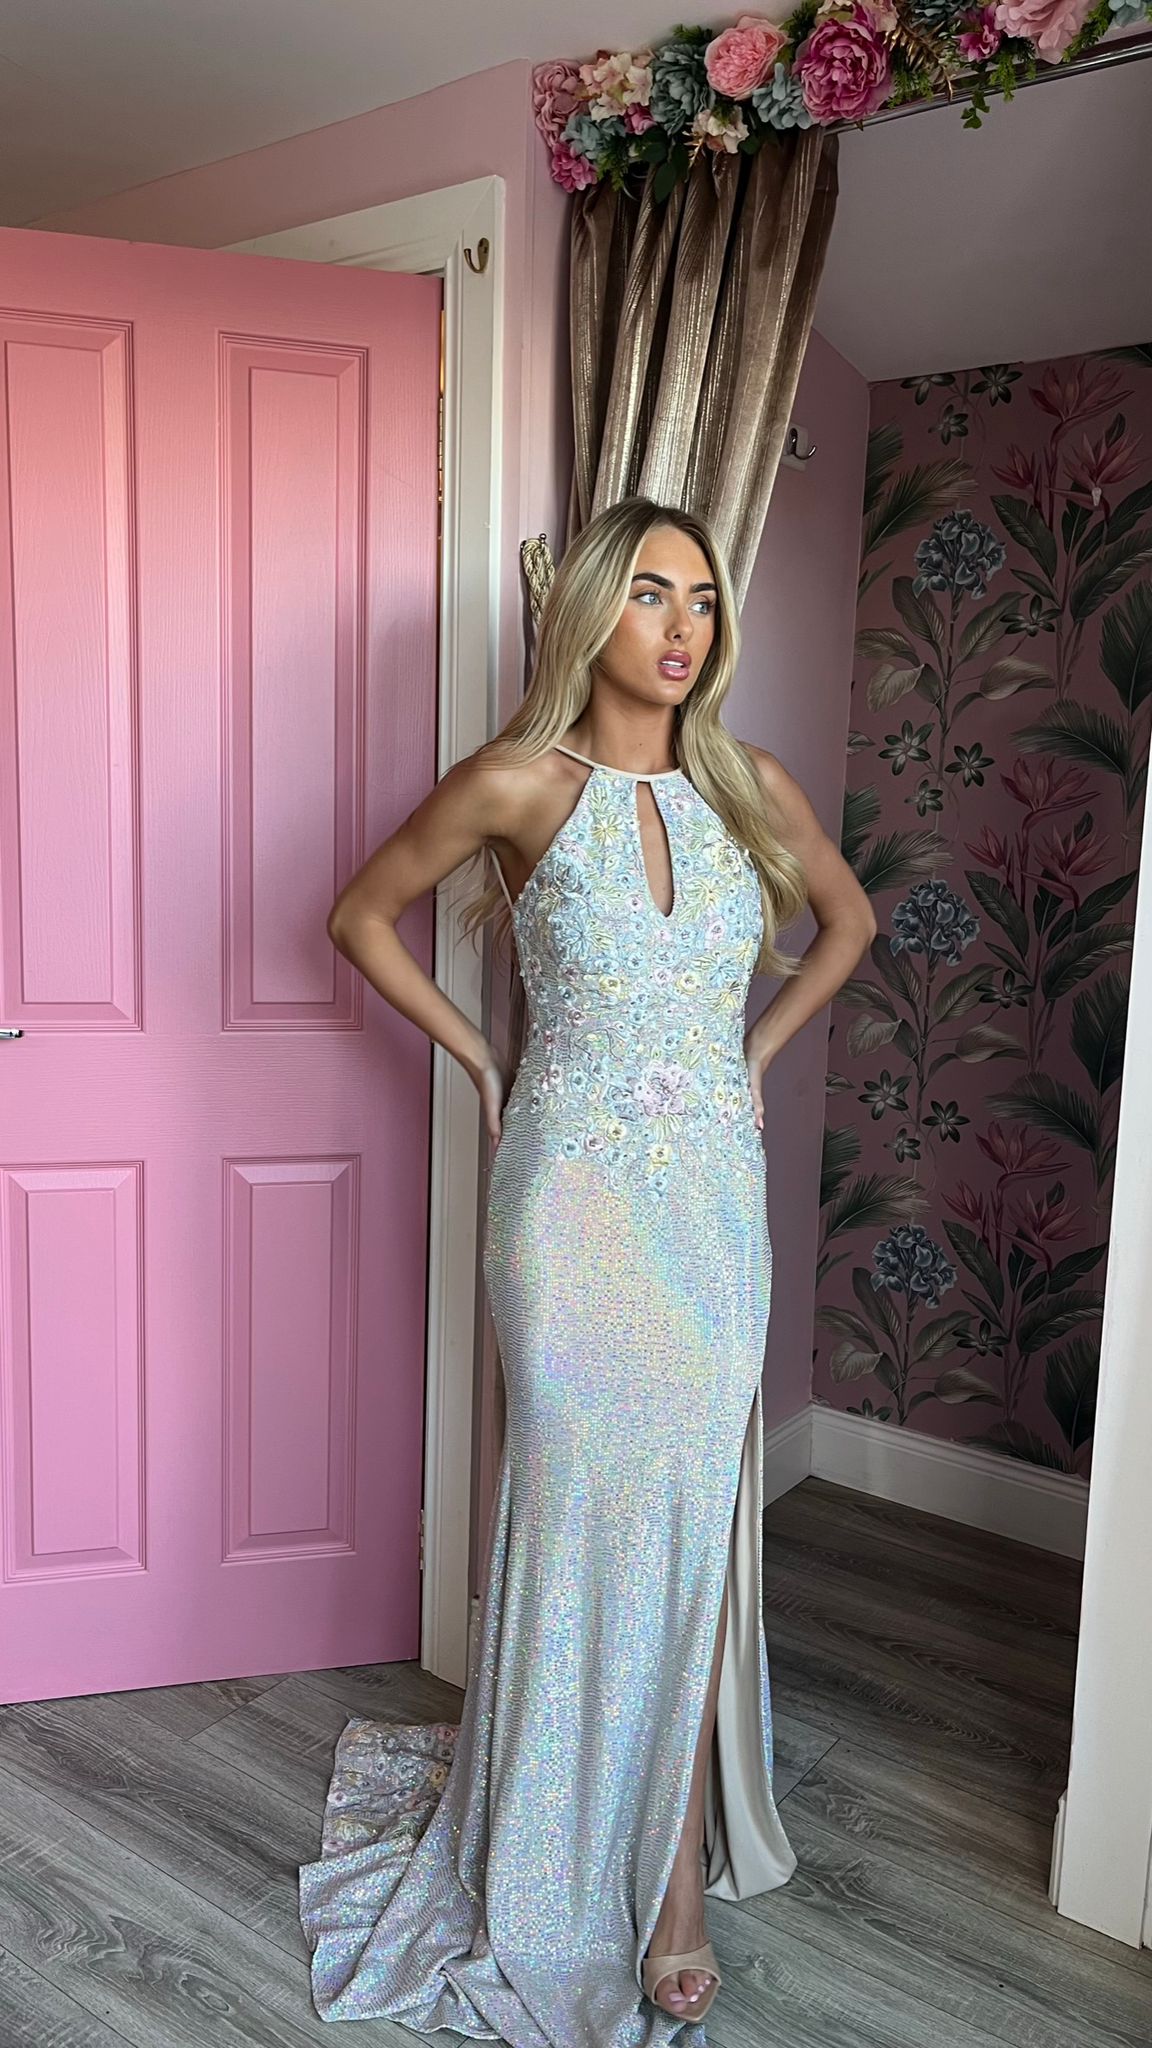 Keira Silver Iridescent Embroidered and Sequin Metallic Lace Up Backless Dress Formal Prom